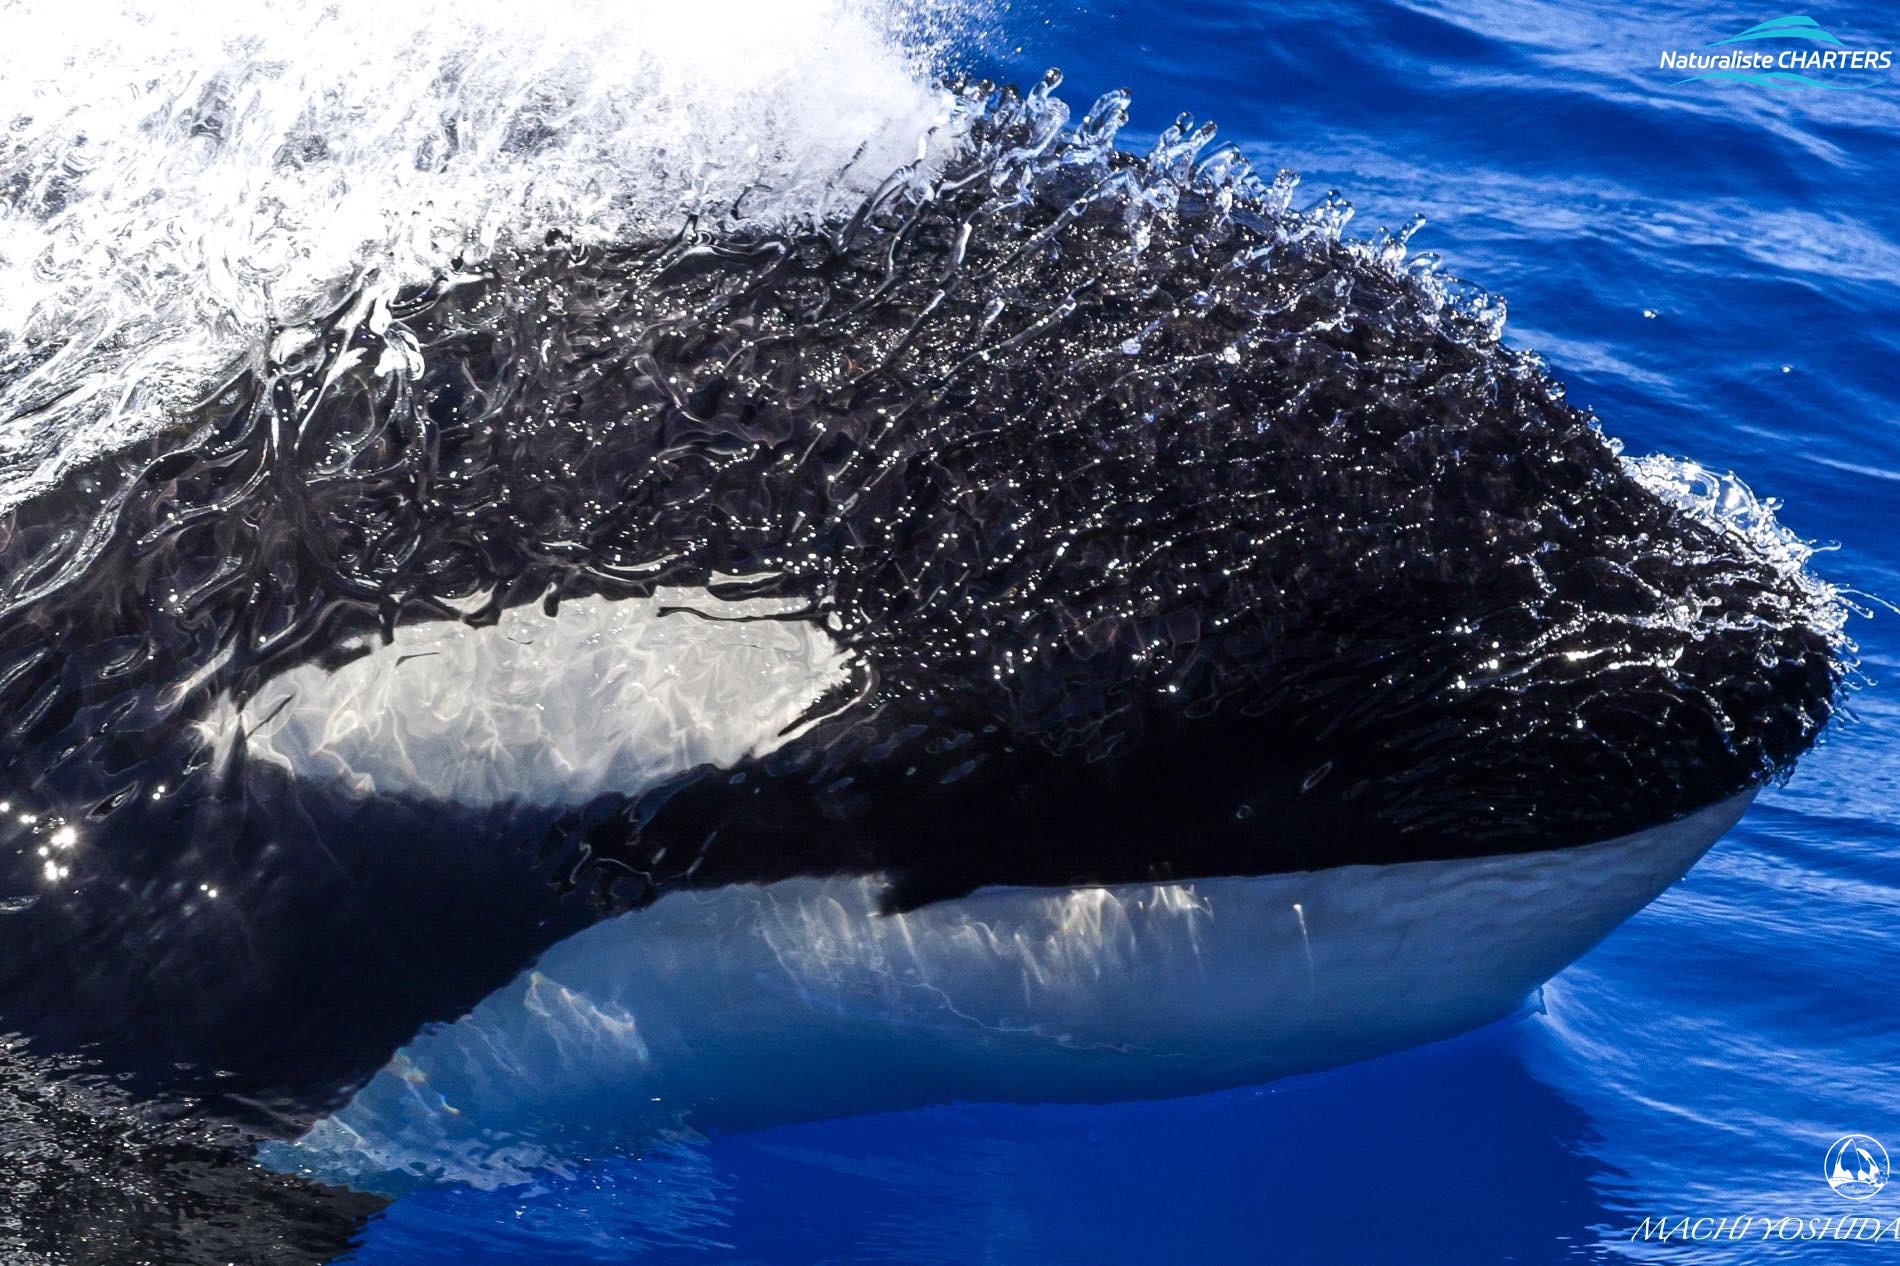 Killer Whales are known for travelling at great speeds